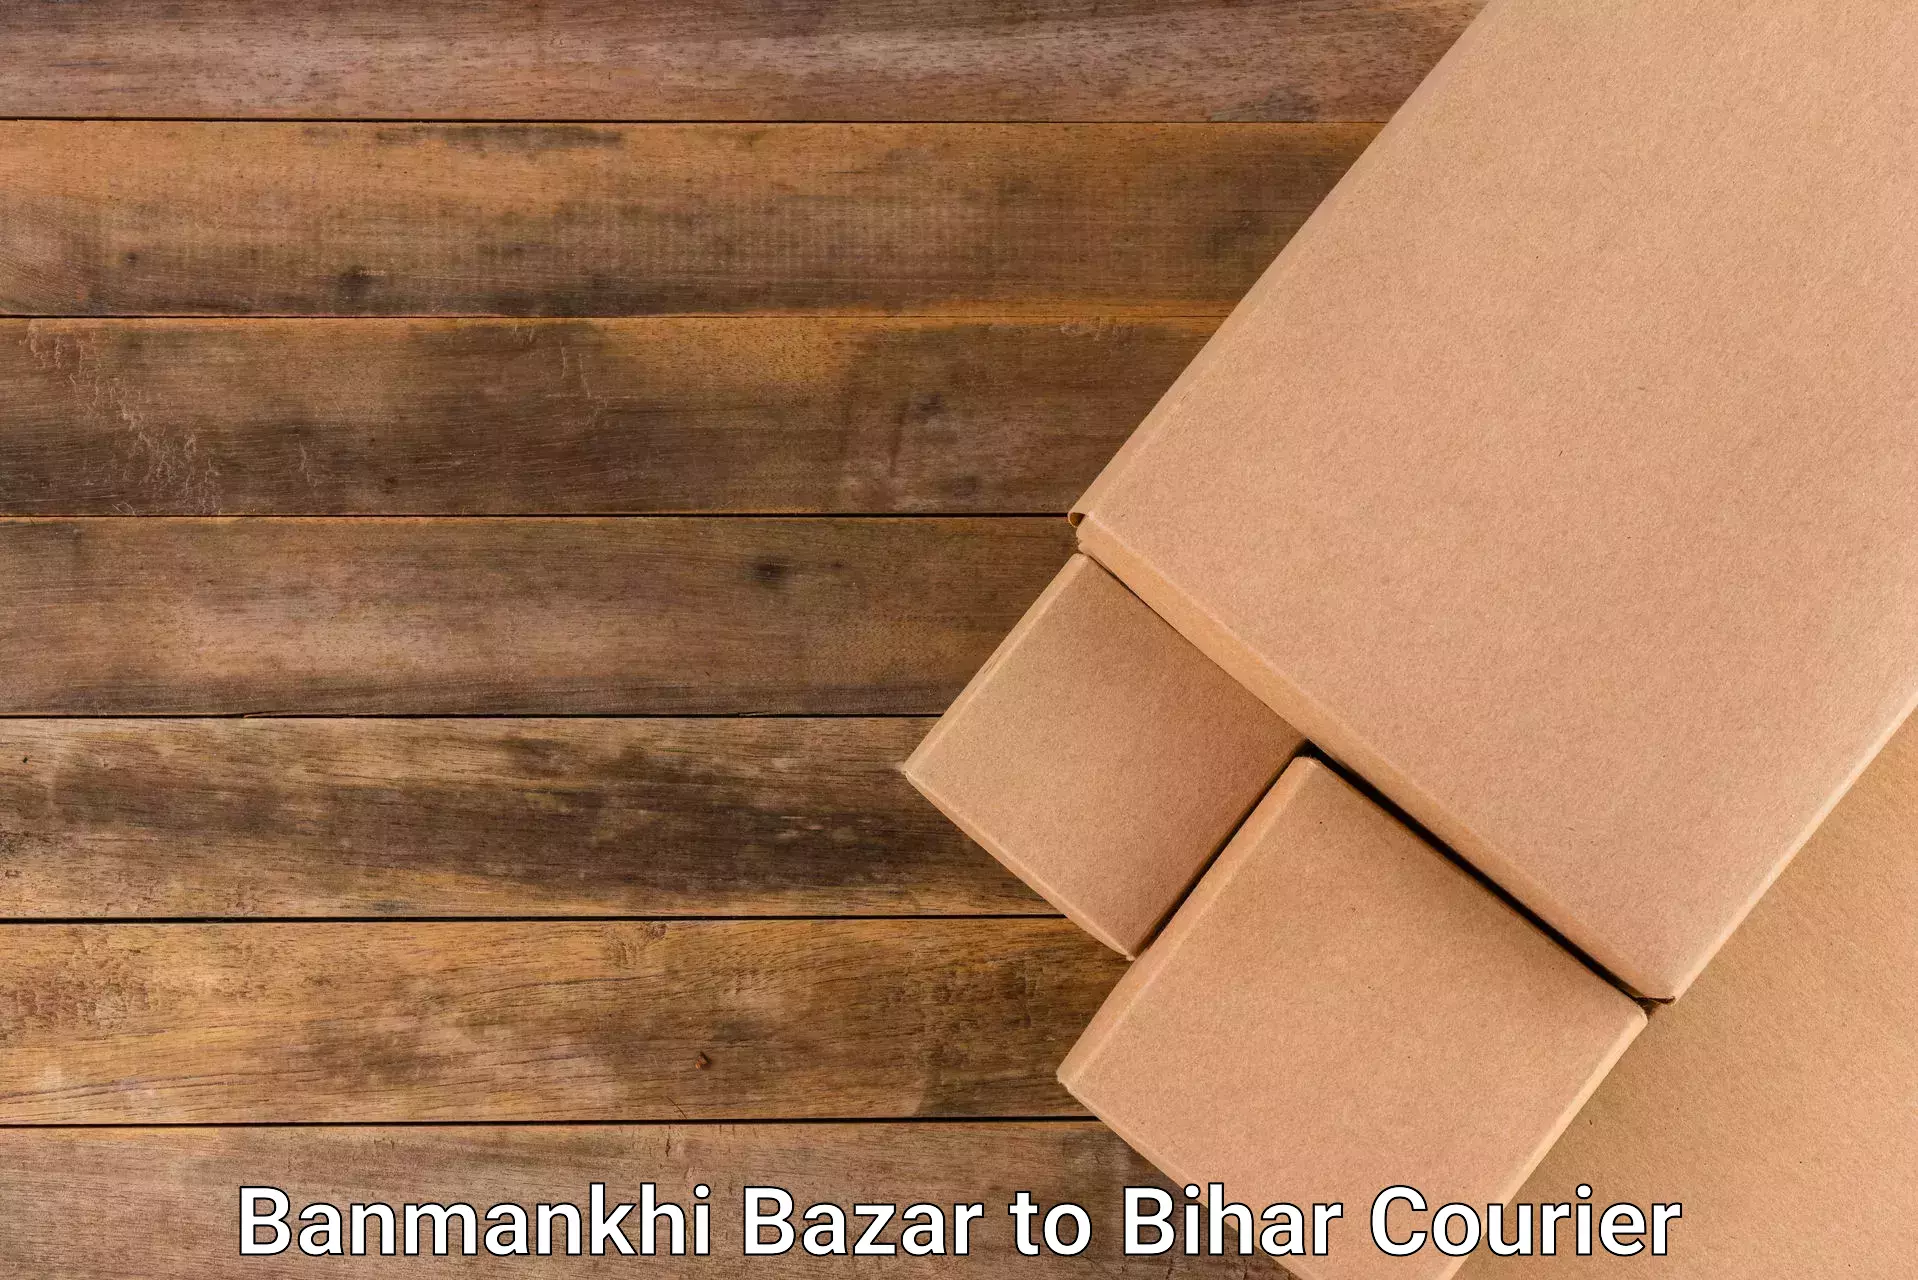 Courier service partnerships Banmankhi Bazar to Bhojpur